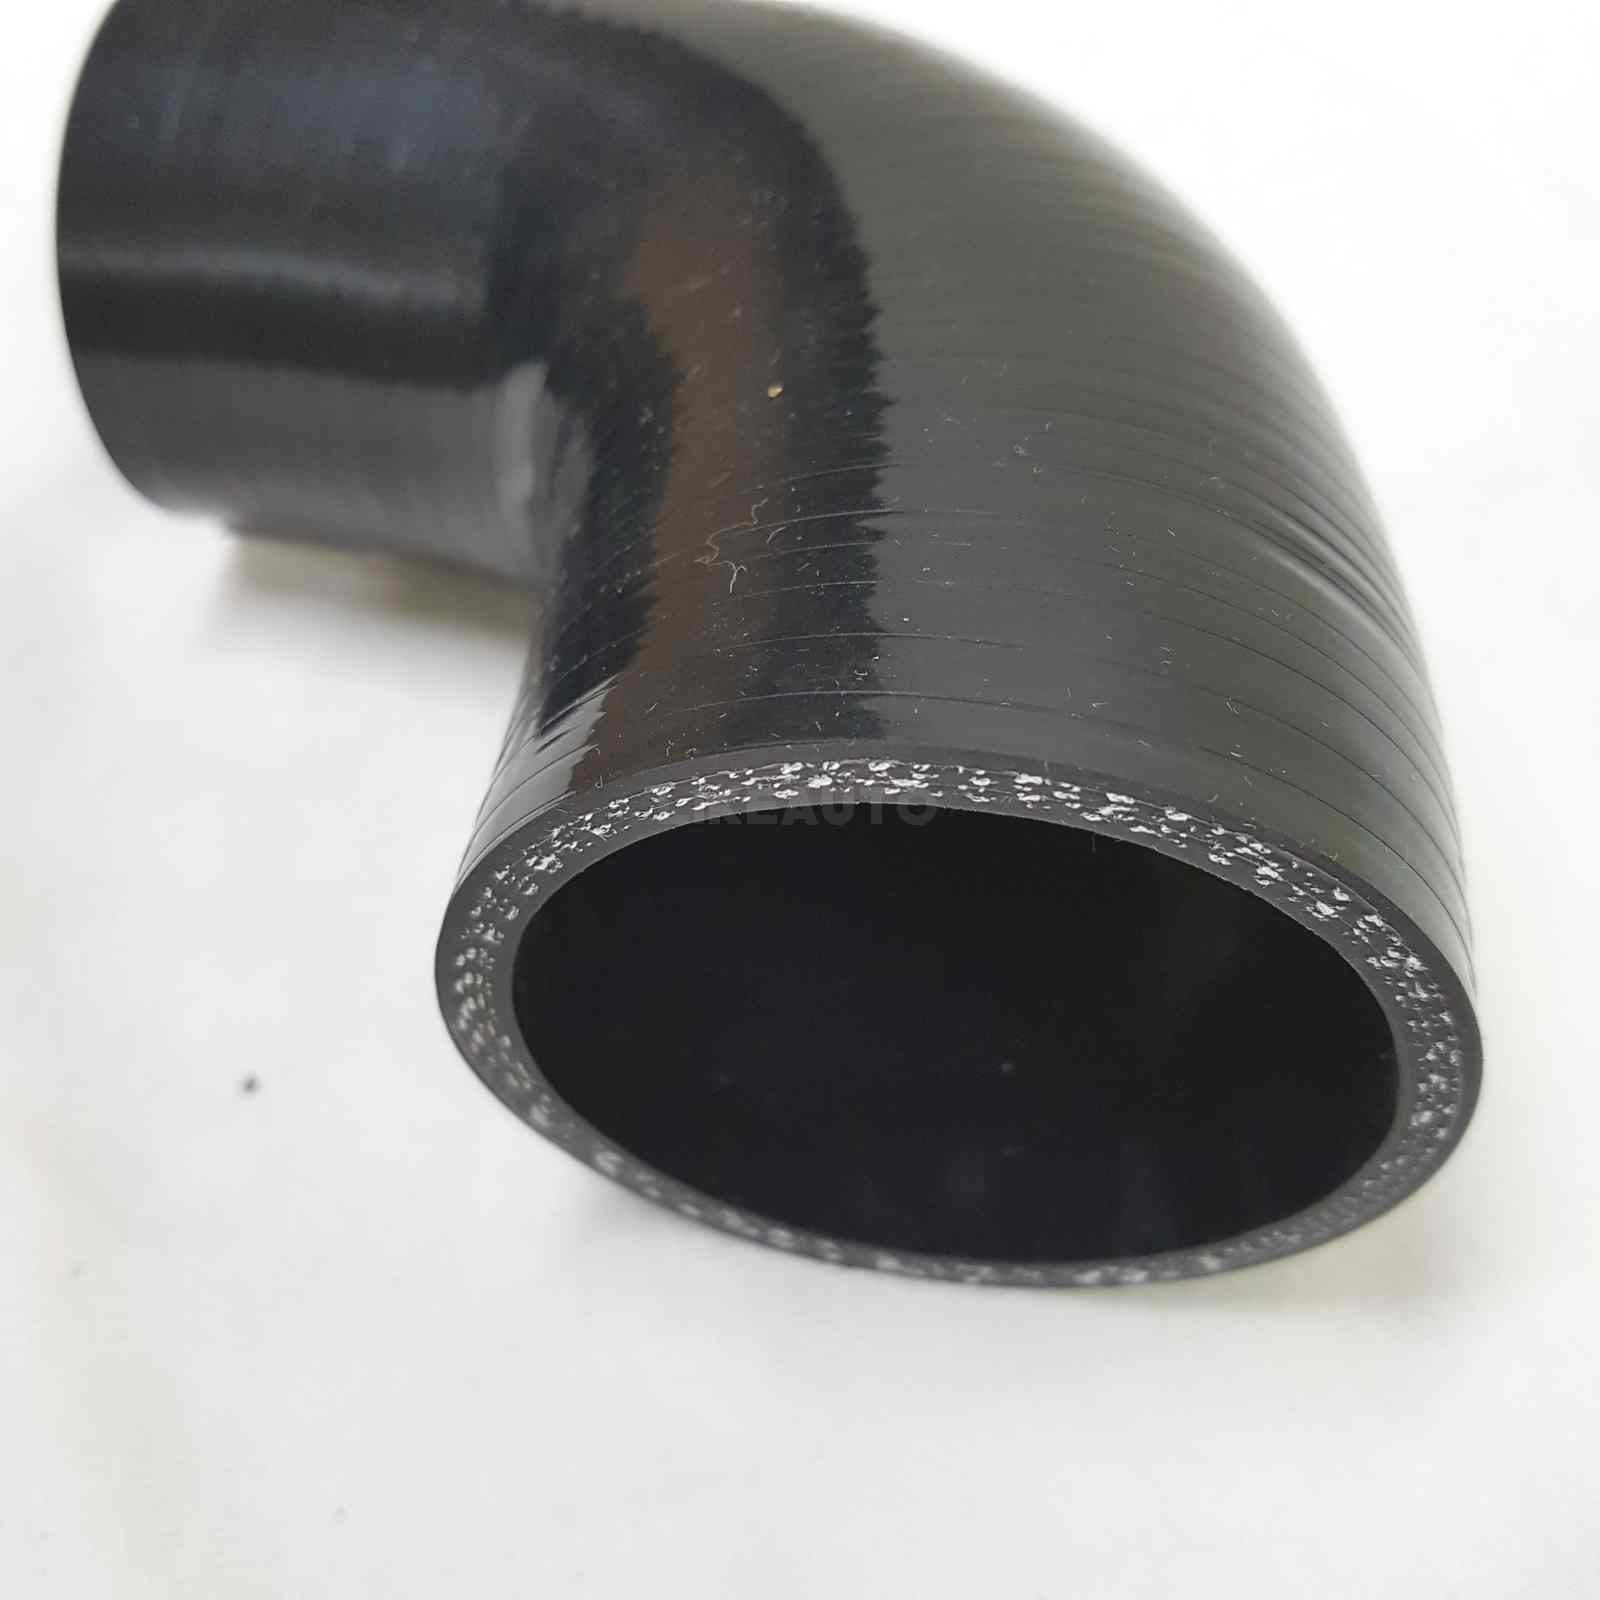 Performance Grade 4 PLY Silicone HOSE 90 Degree BEND Reducer 2\